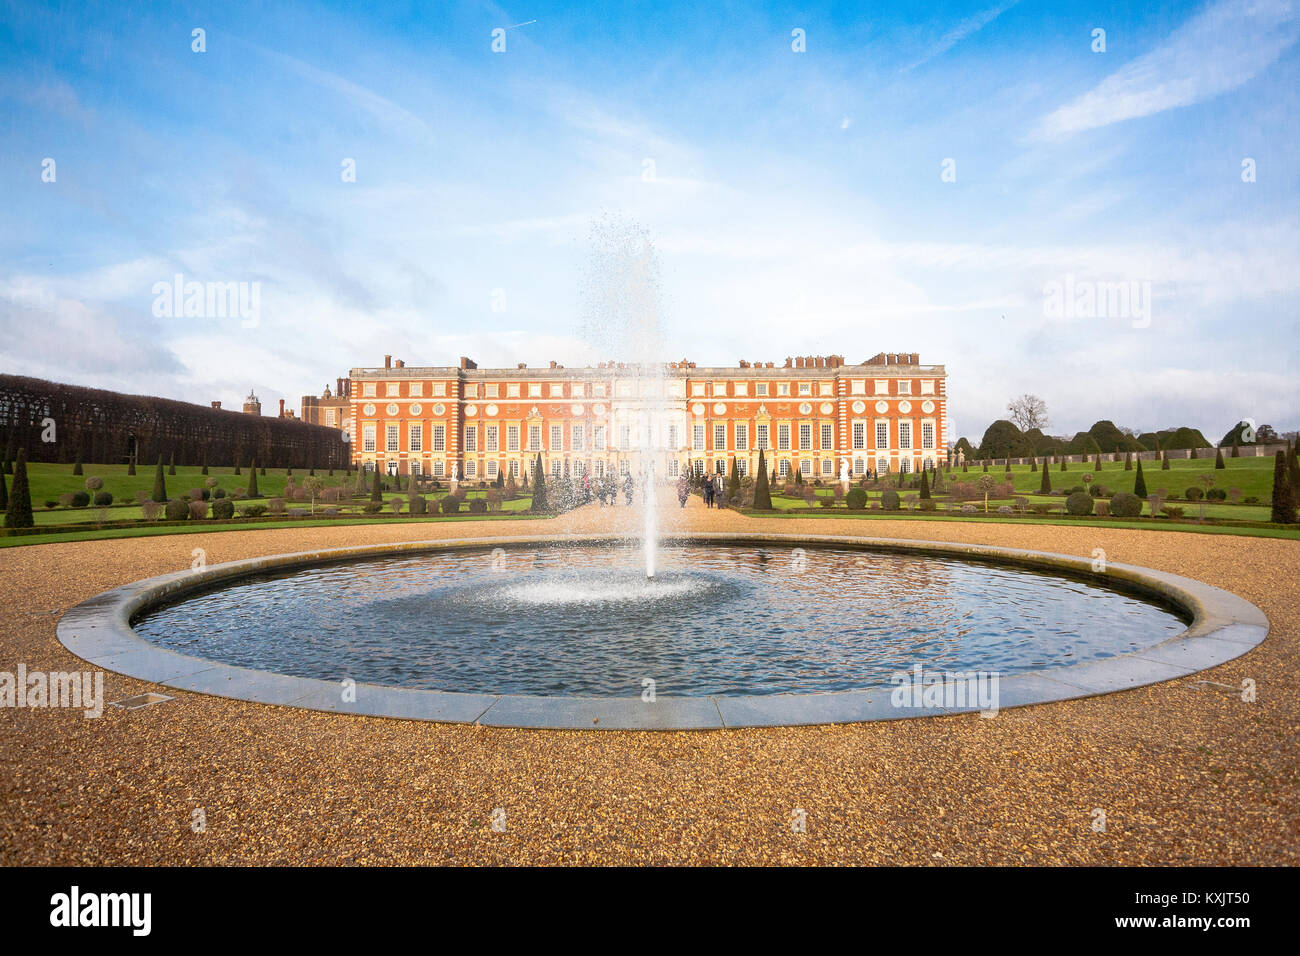 Hampton Court Palace is a royal palace in the borough of Richmond, London. It has two contrasting architectural styles, domestic Tudor and Baroque. Stock Photo